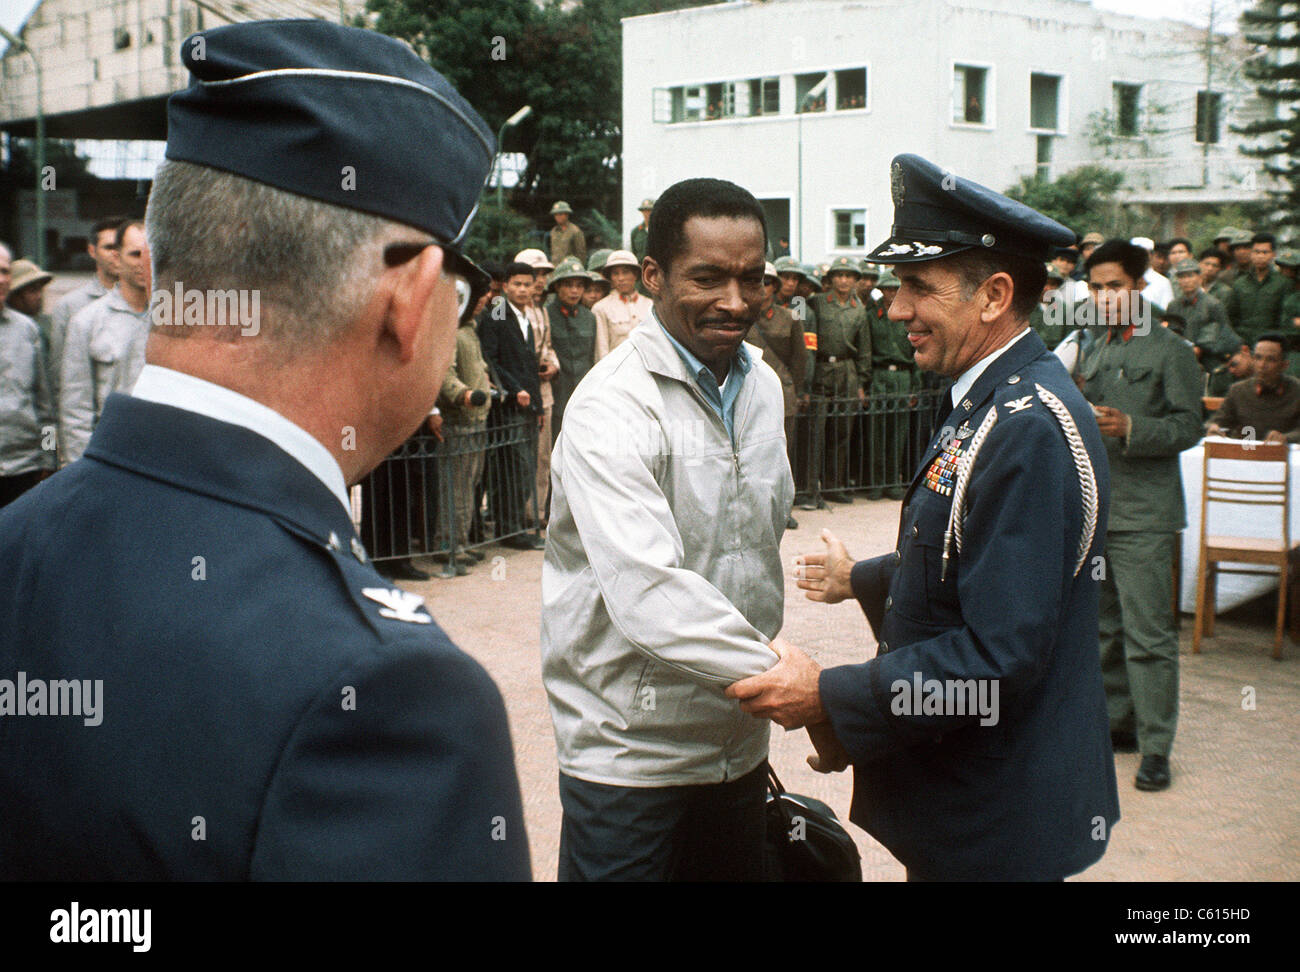 Air Force Major Norman A. McDaniel is greeted by a US delegation at a Hanoi Airport upon his release as prisoner of war in North Vietnam. Shot down on a reconnaissance mission over North Vietnam on July 20 1966 he was a POW for over 6 years. Feb-Apr 1973. (BSLOC 2011 12 350) Stock Photo